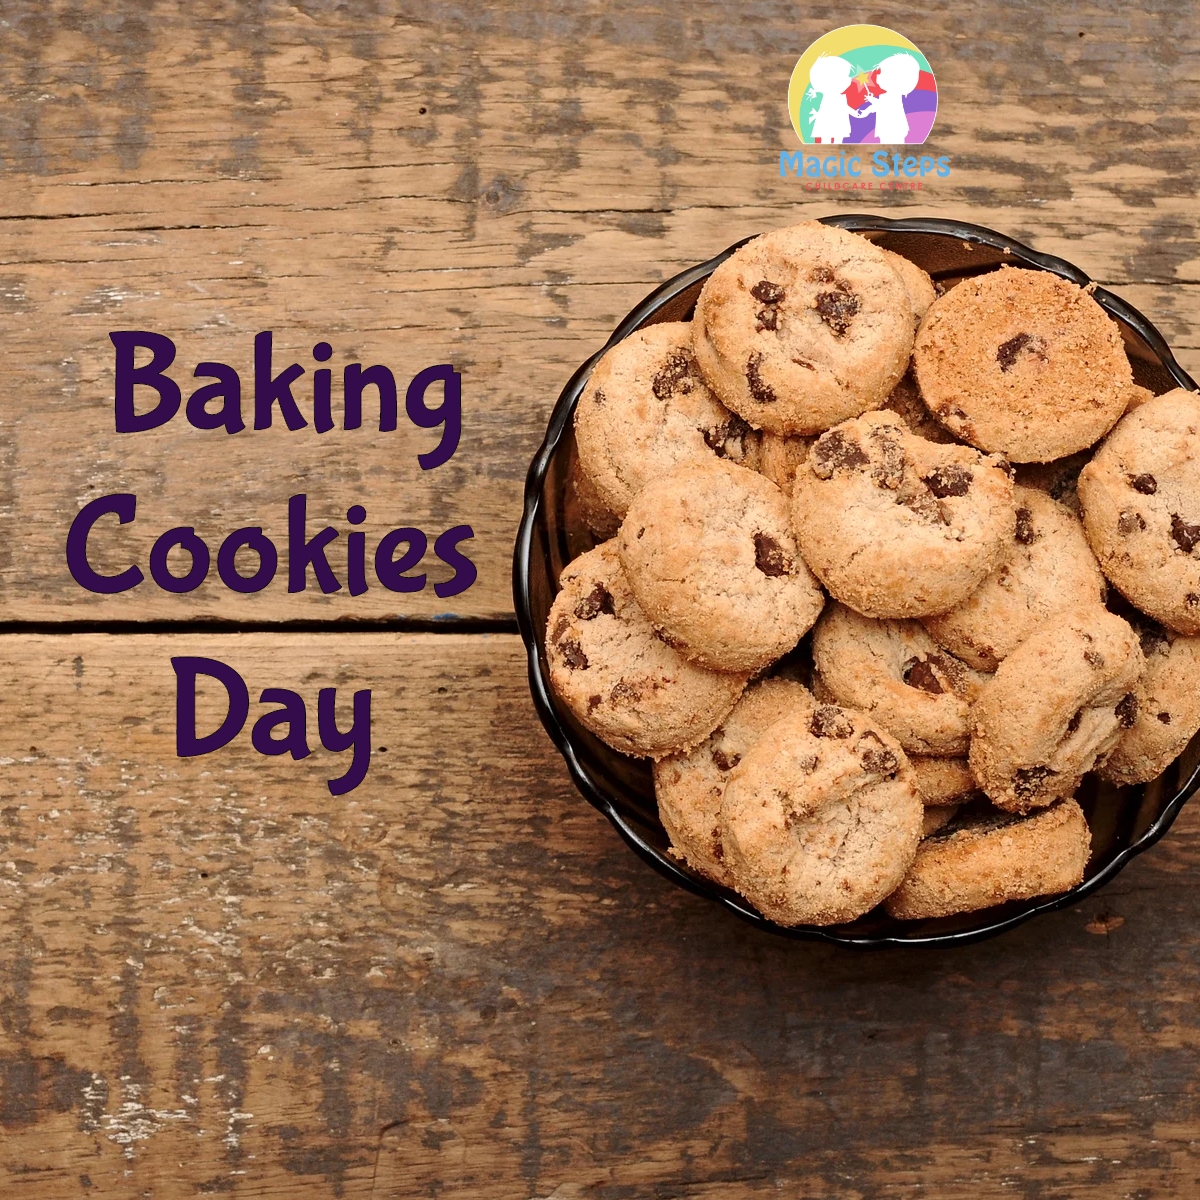 Baking Cookies Day- Thursday 11th March